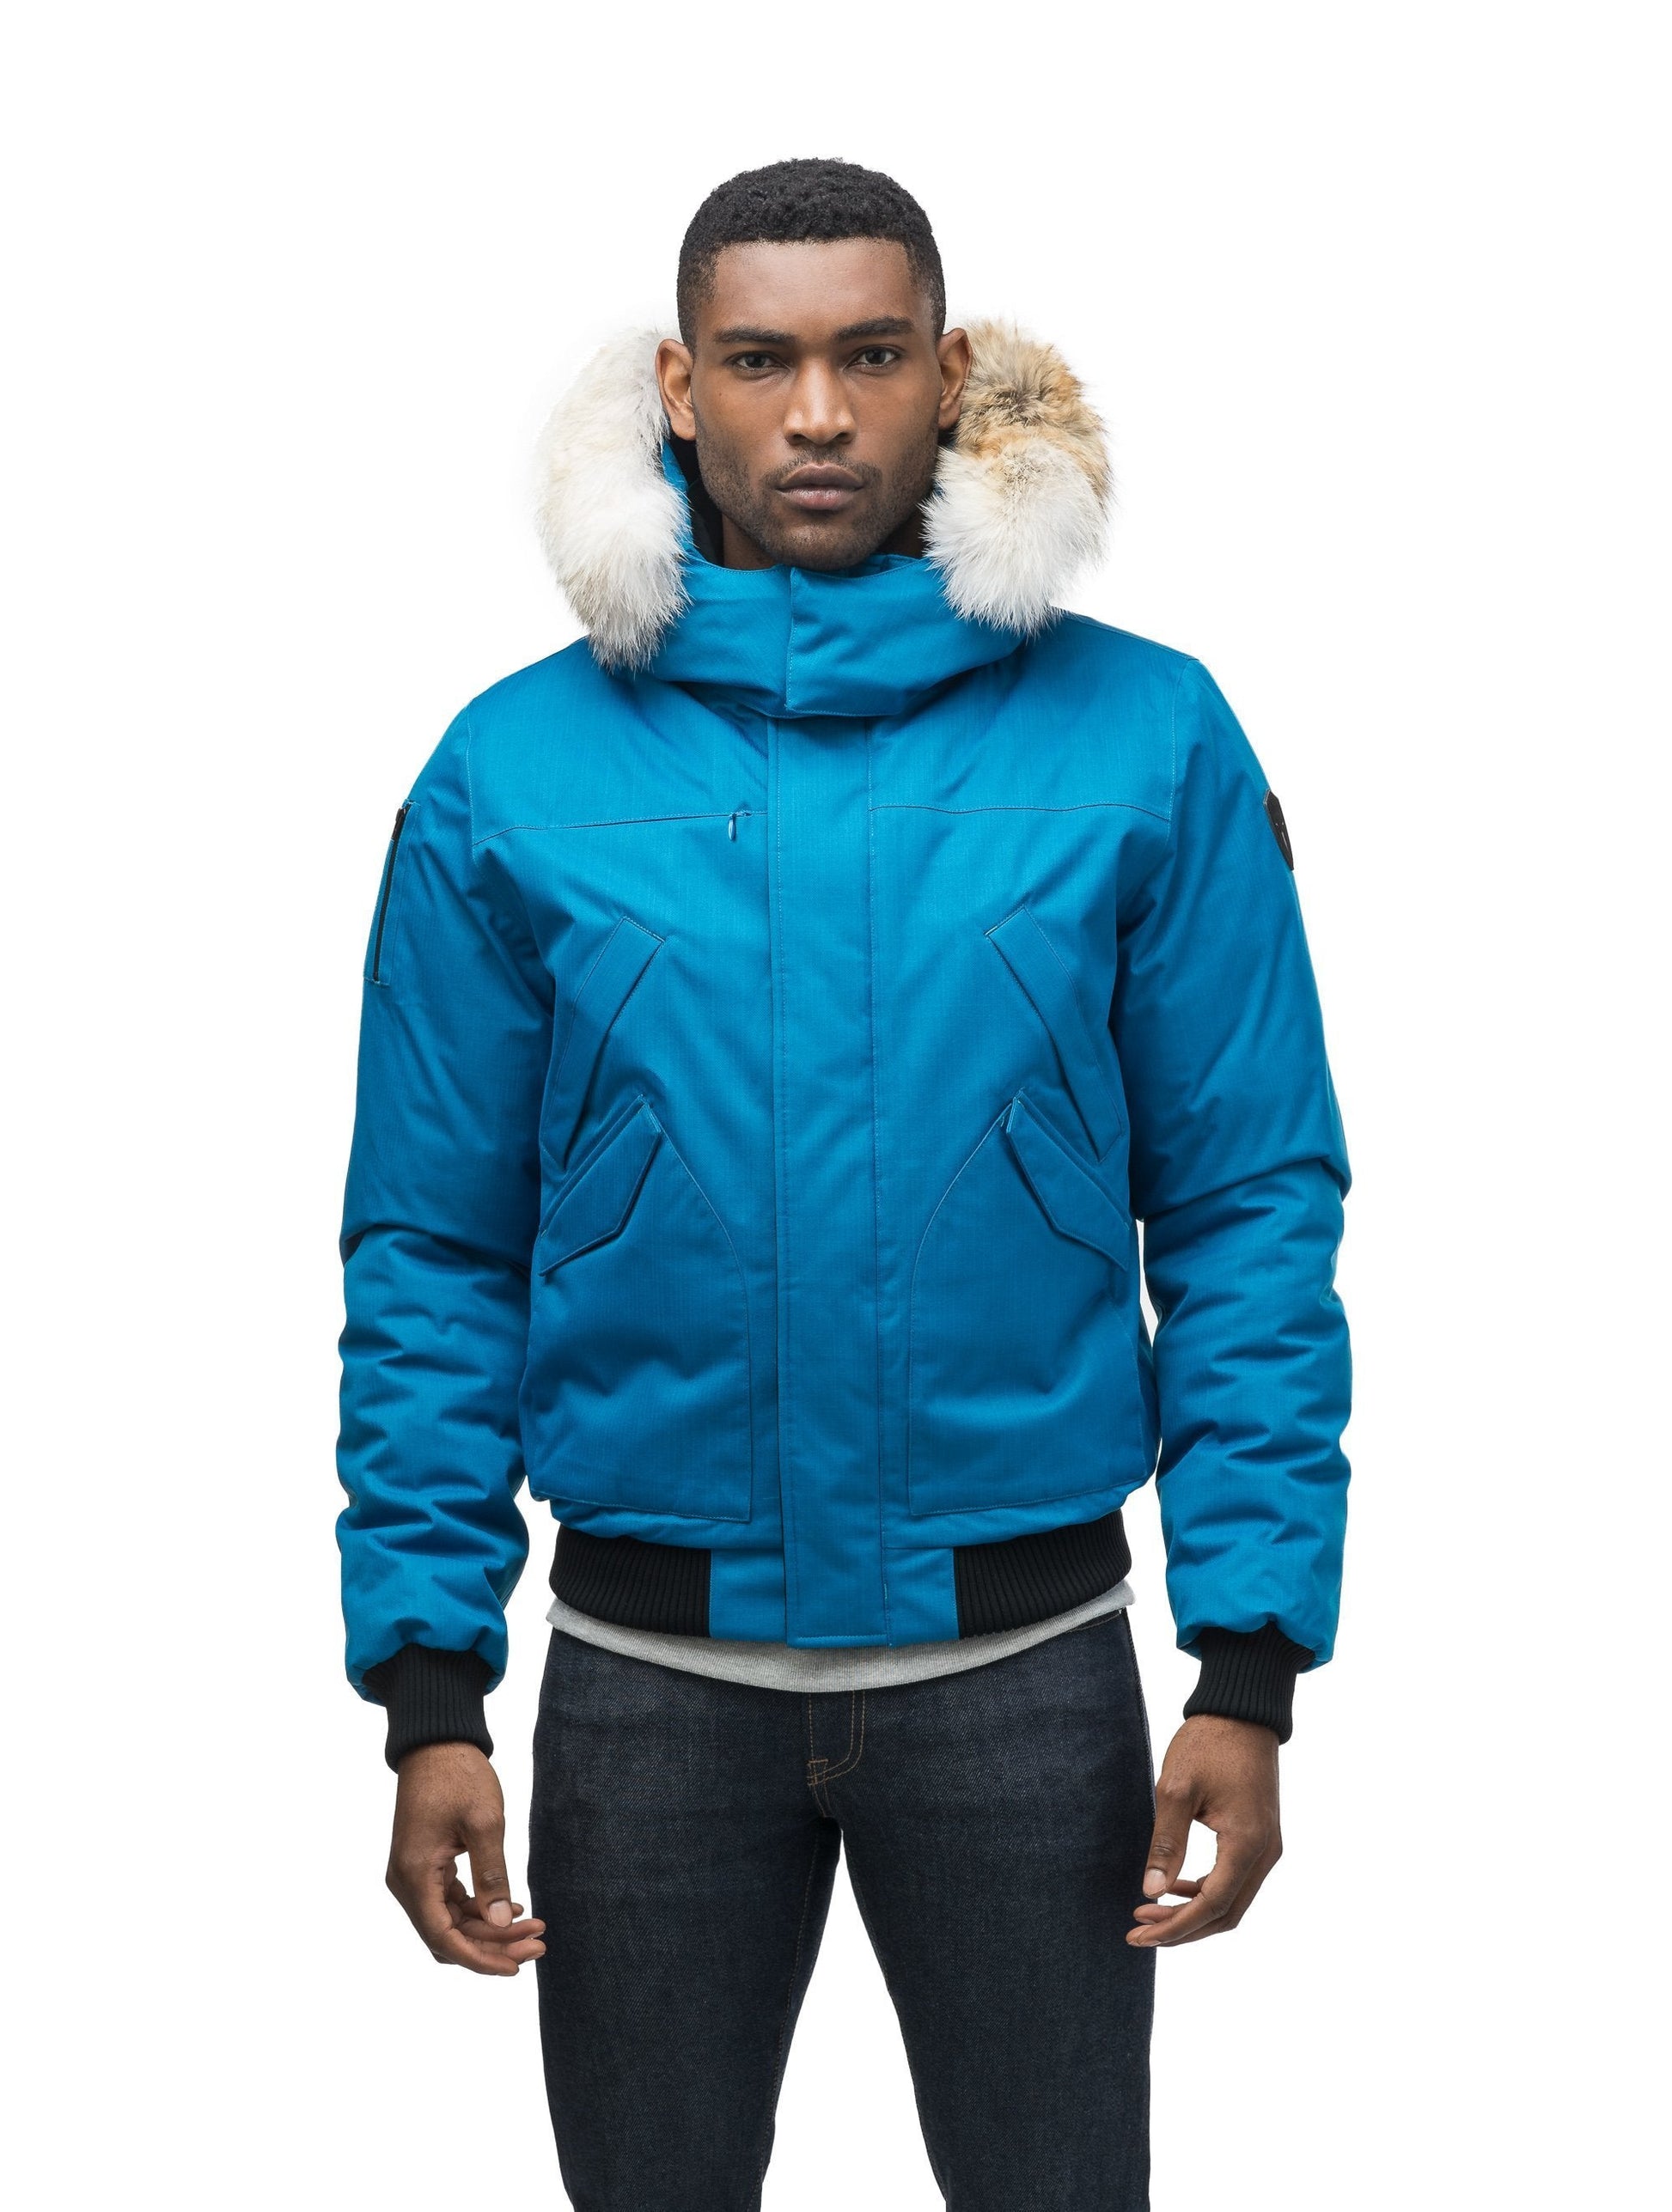 Men's classic down filled bomber jacket with a down filledÃ‚Â hood that features a removable coyote fur trim and concealed moldable framing wire in Sea Blue